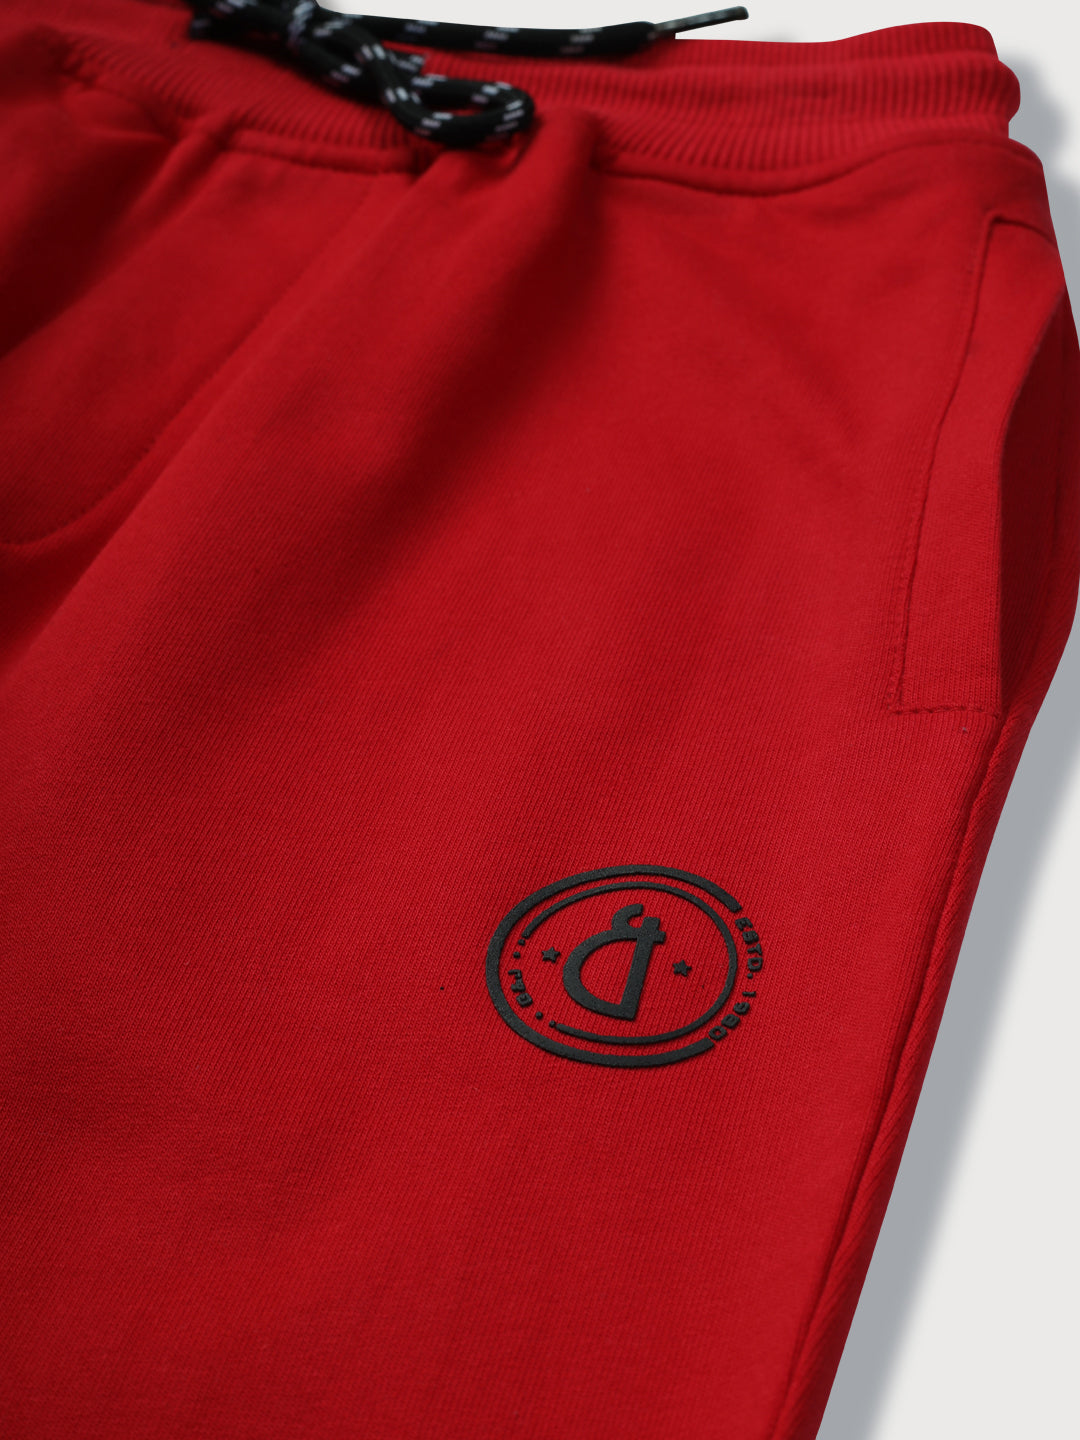 Boys Red Cotton Solid Elasticated Track Pant